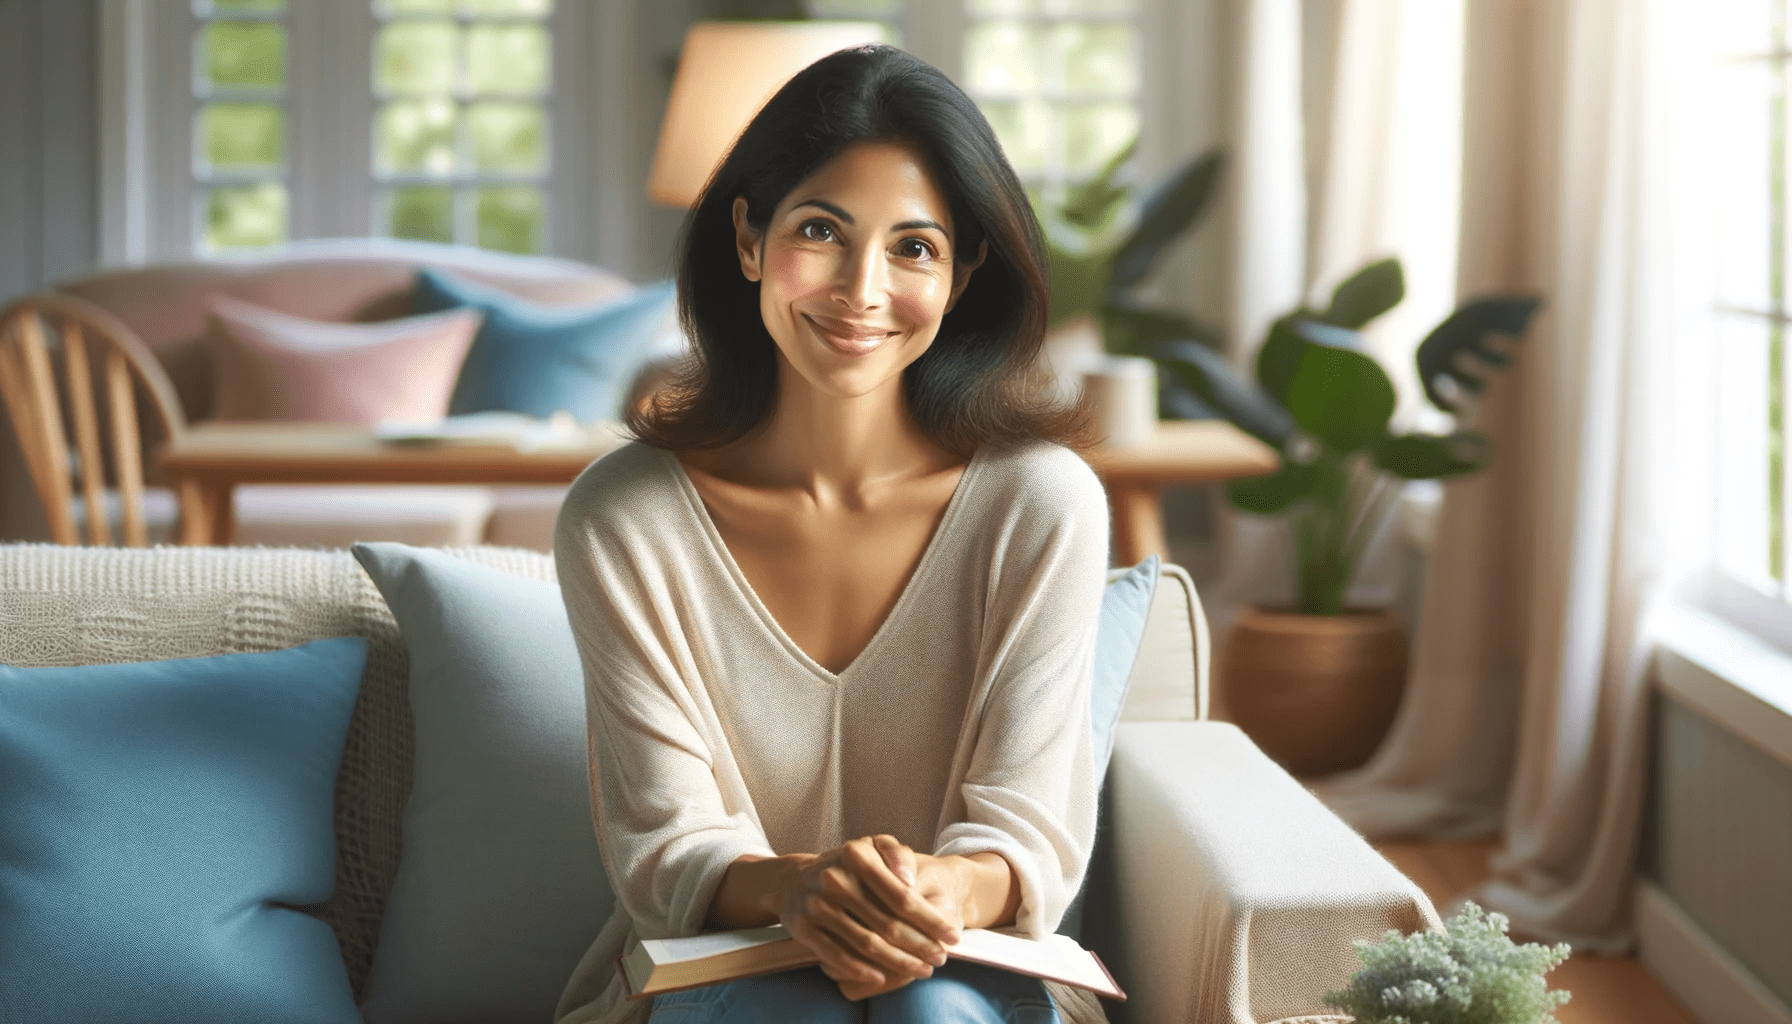 A bright and welcoming living room scene features a South Asian woman in her 30s with a compassionate and kind demeanor. She sits on a cozy armchair